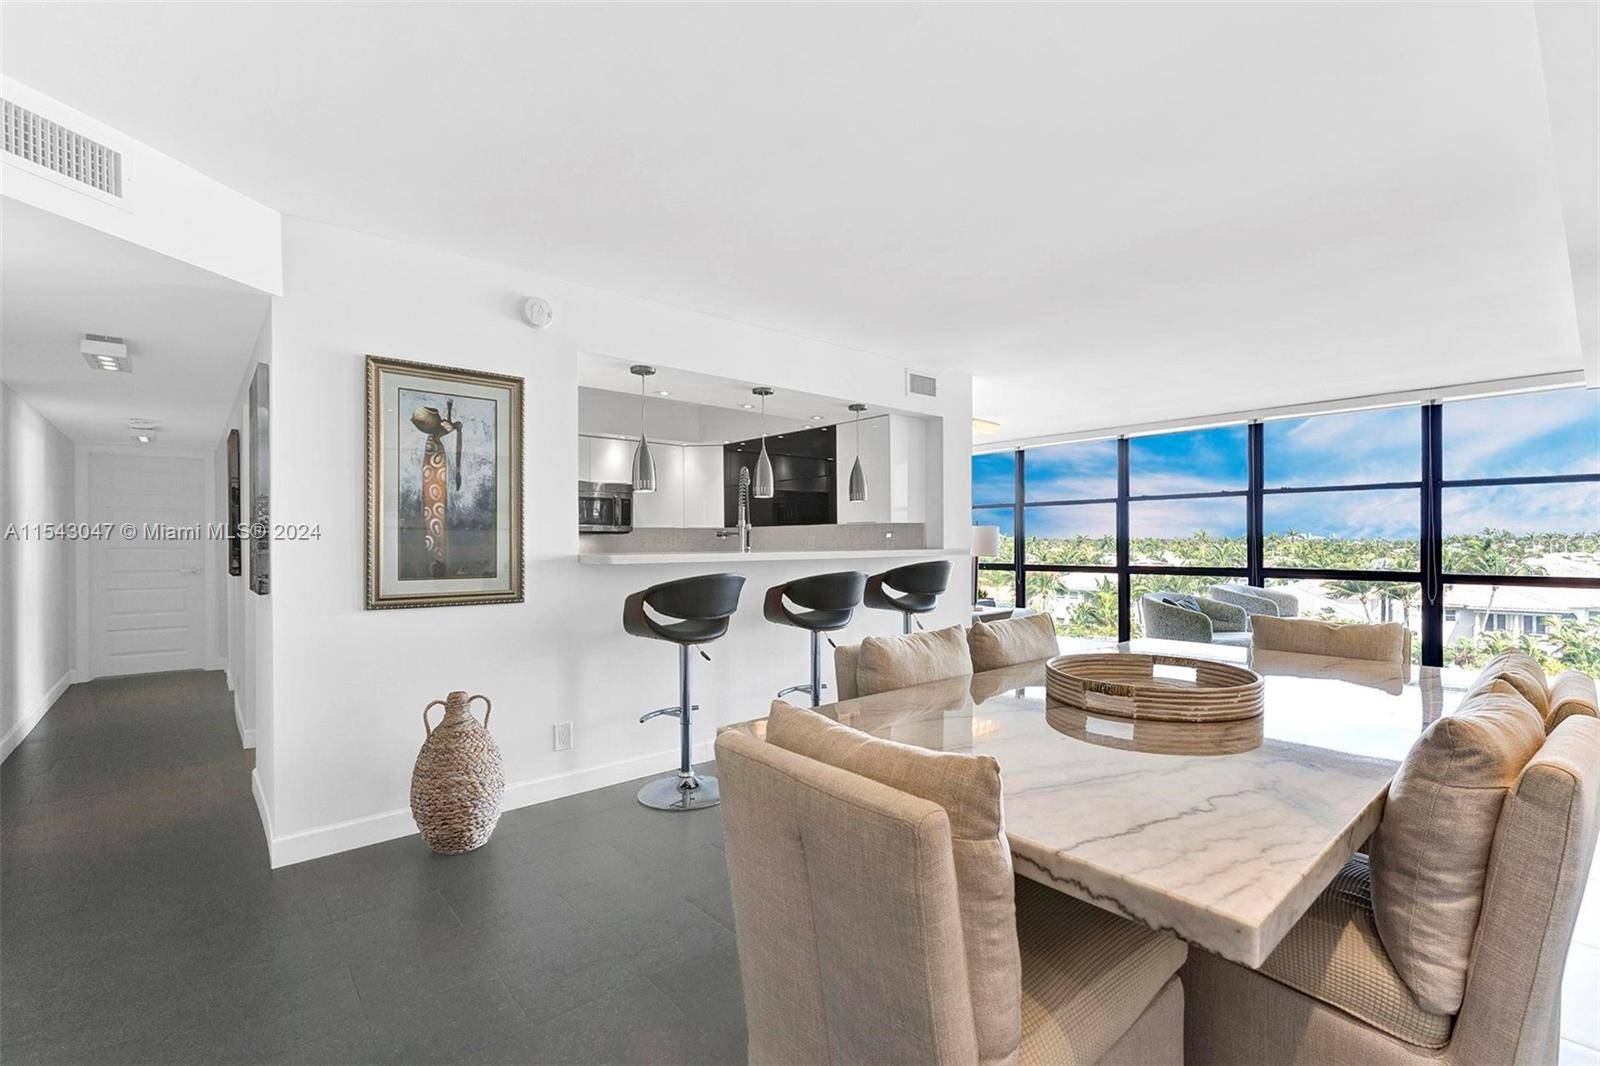 Welcome to this fully renovated turn key premium 1, 455 sq ft unit at Oceanview Park, offering 2 beds Den, 2 baths, elegant new furniture, new kitchen cabinets, new appliances, ...